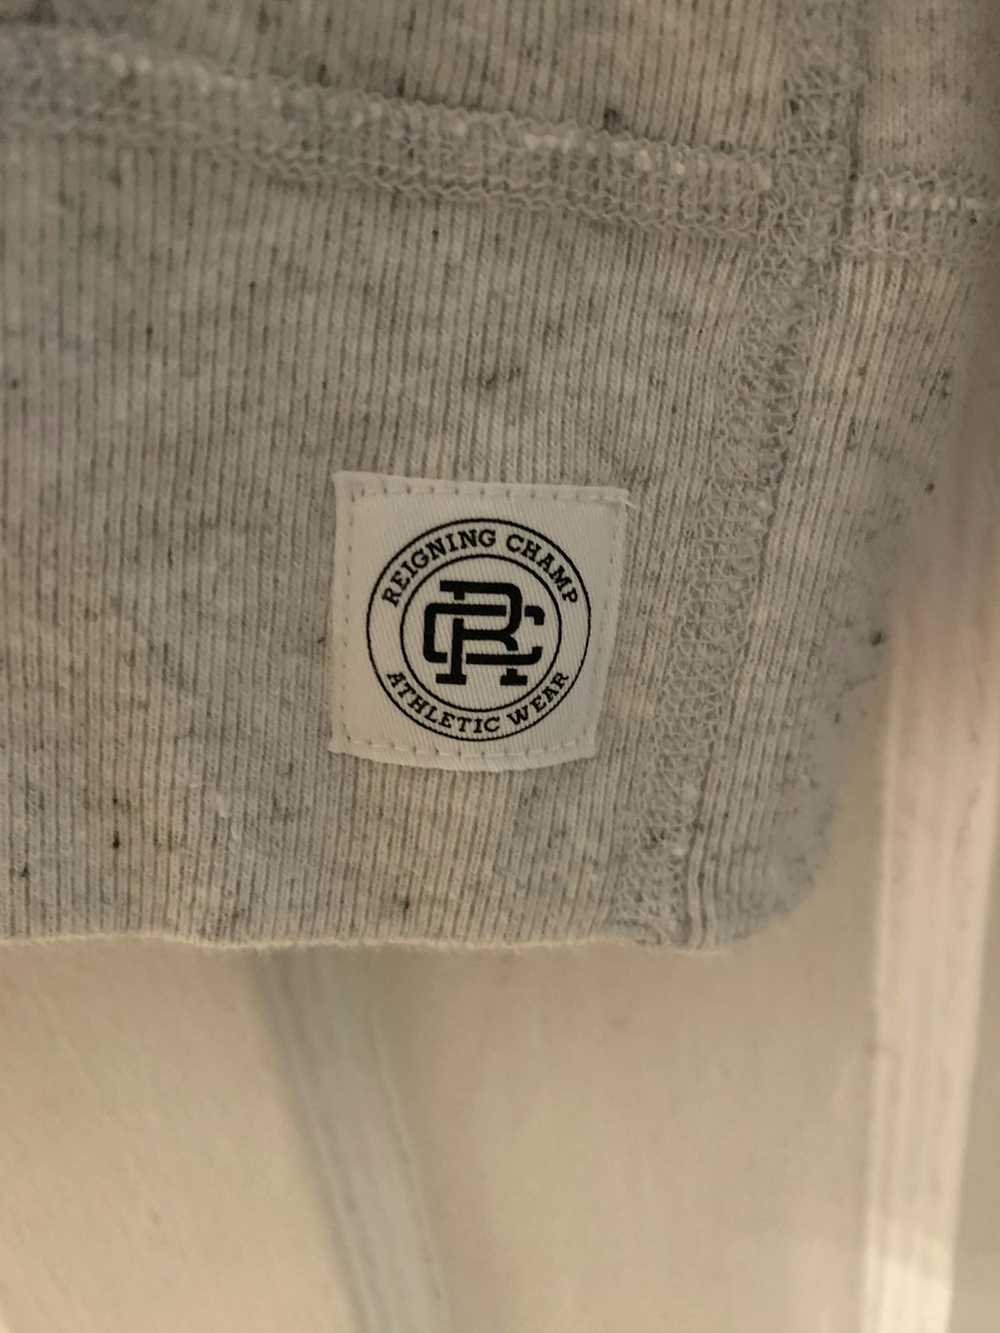 Reigning Champ Reigning Champ Hoodie - image 2